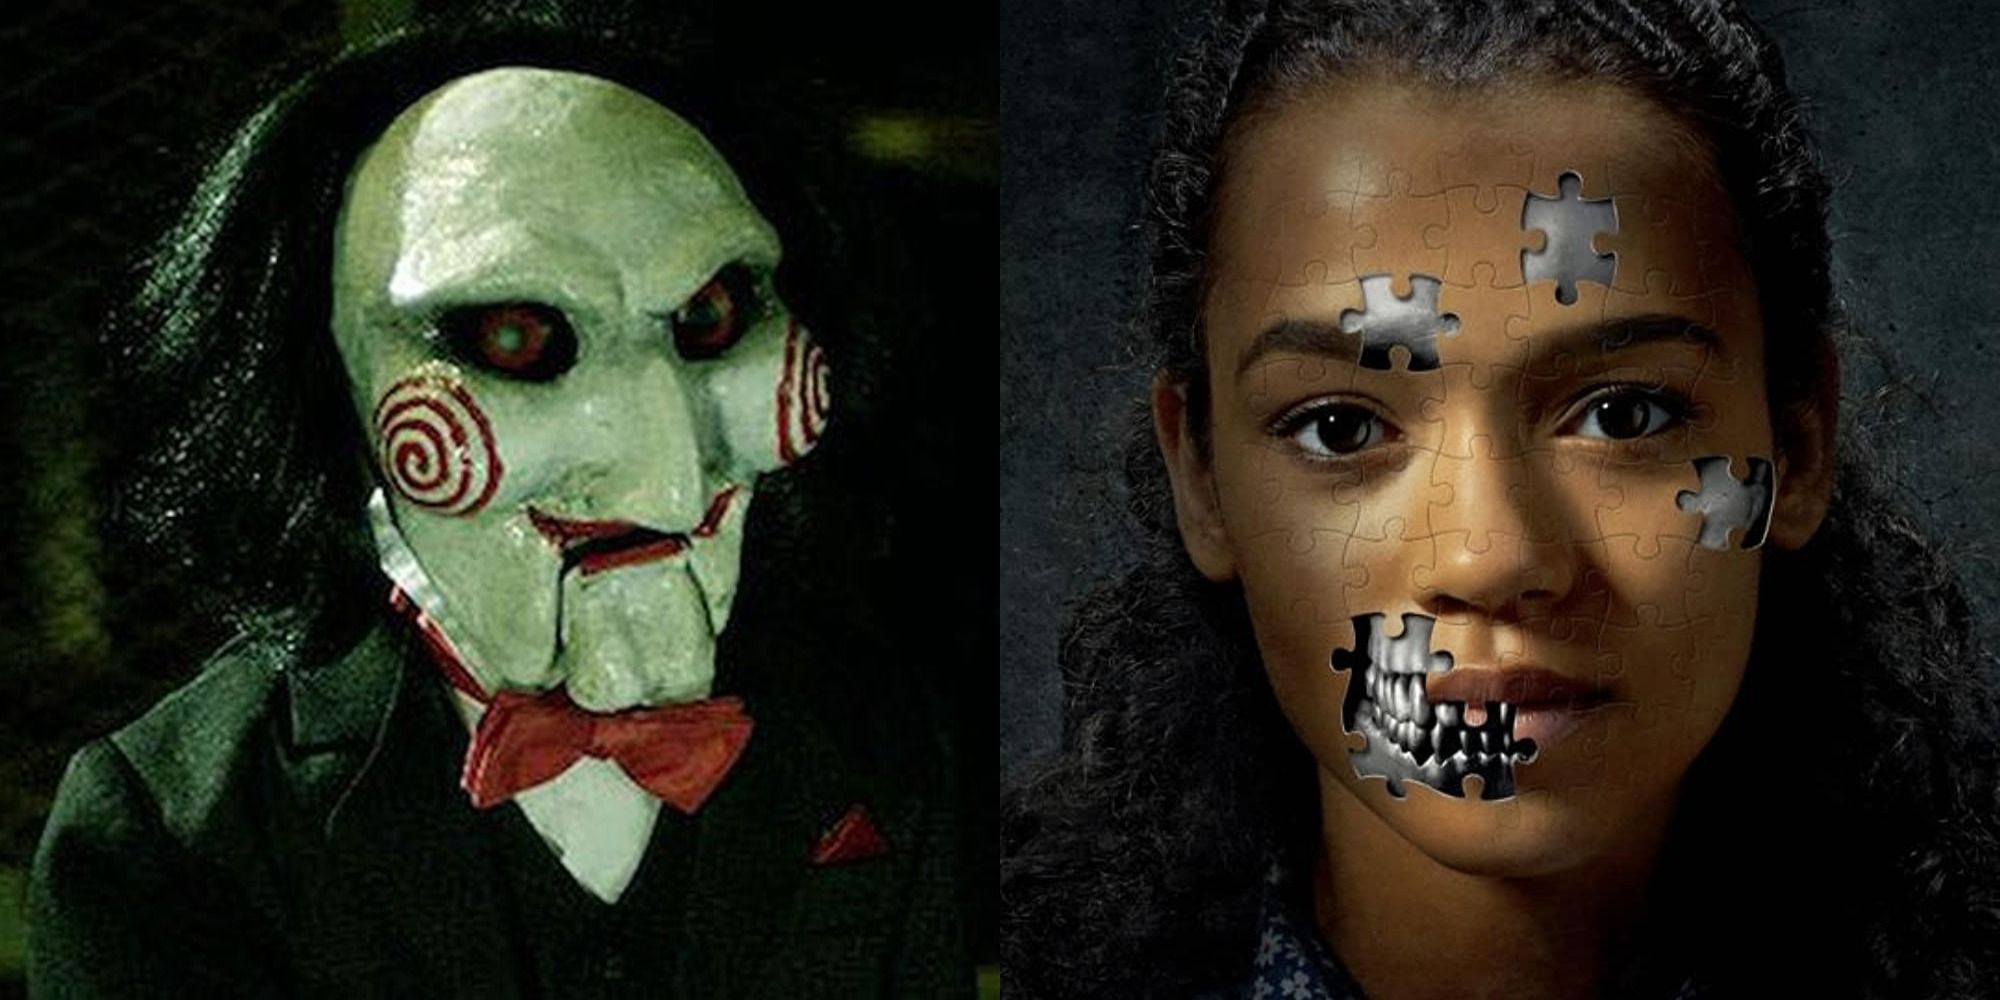 Split image of the Jigsaw doll from Saw and Zoey from the poster for Escape Room